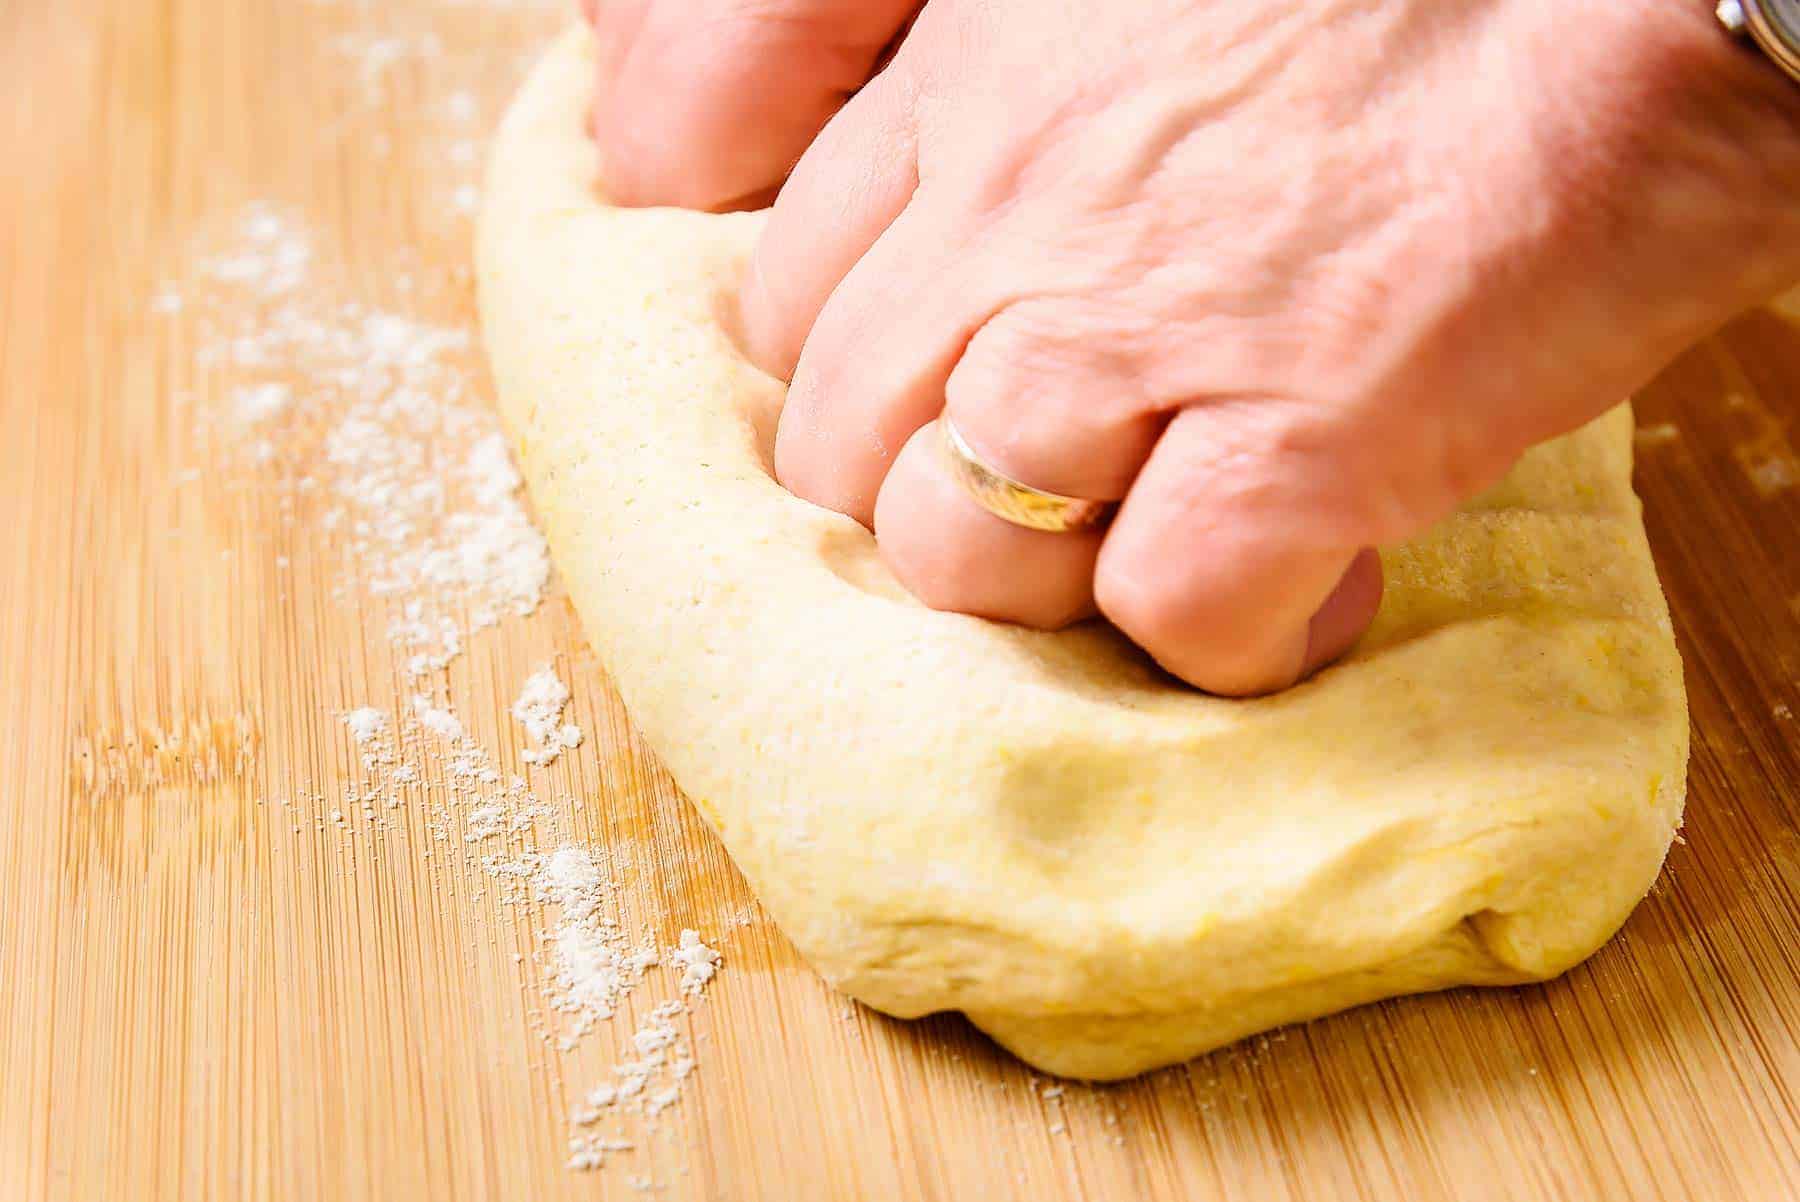 Knocking back the dough after proving